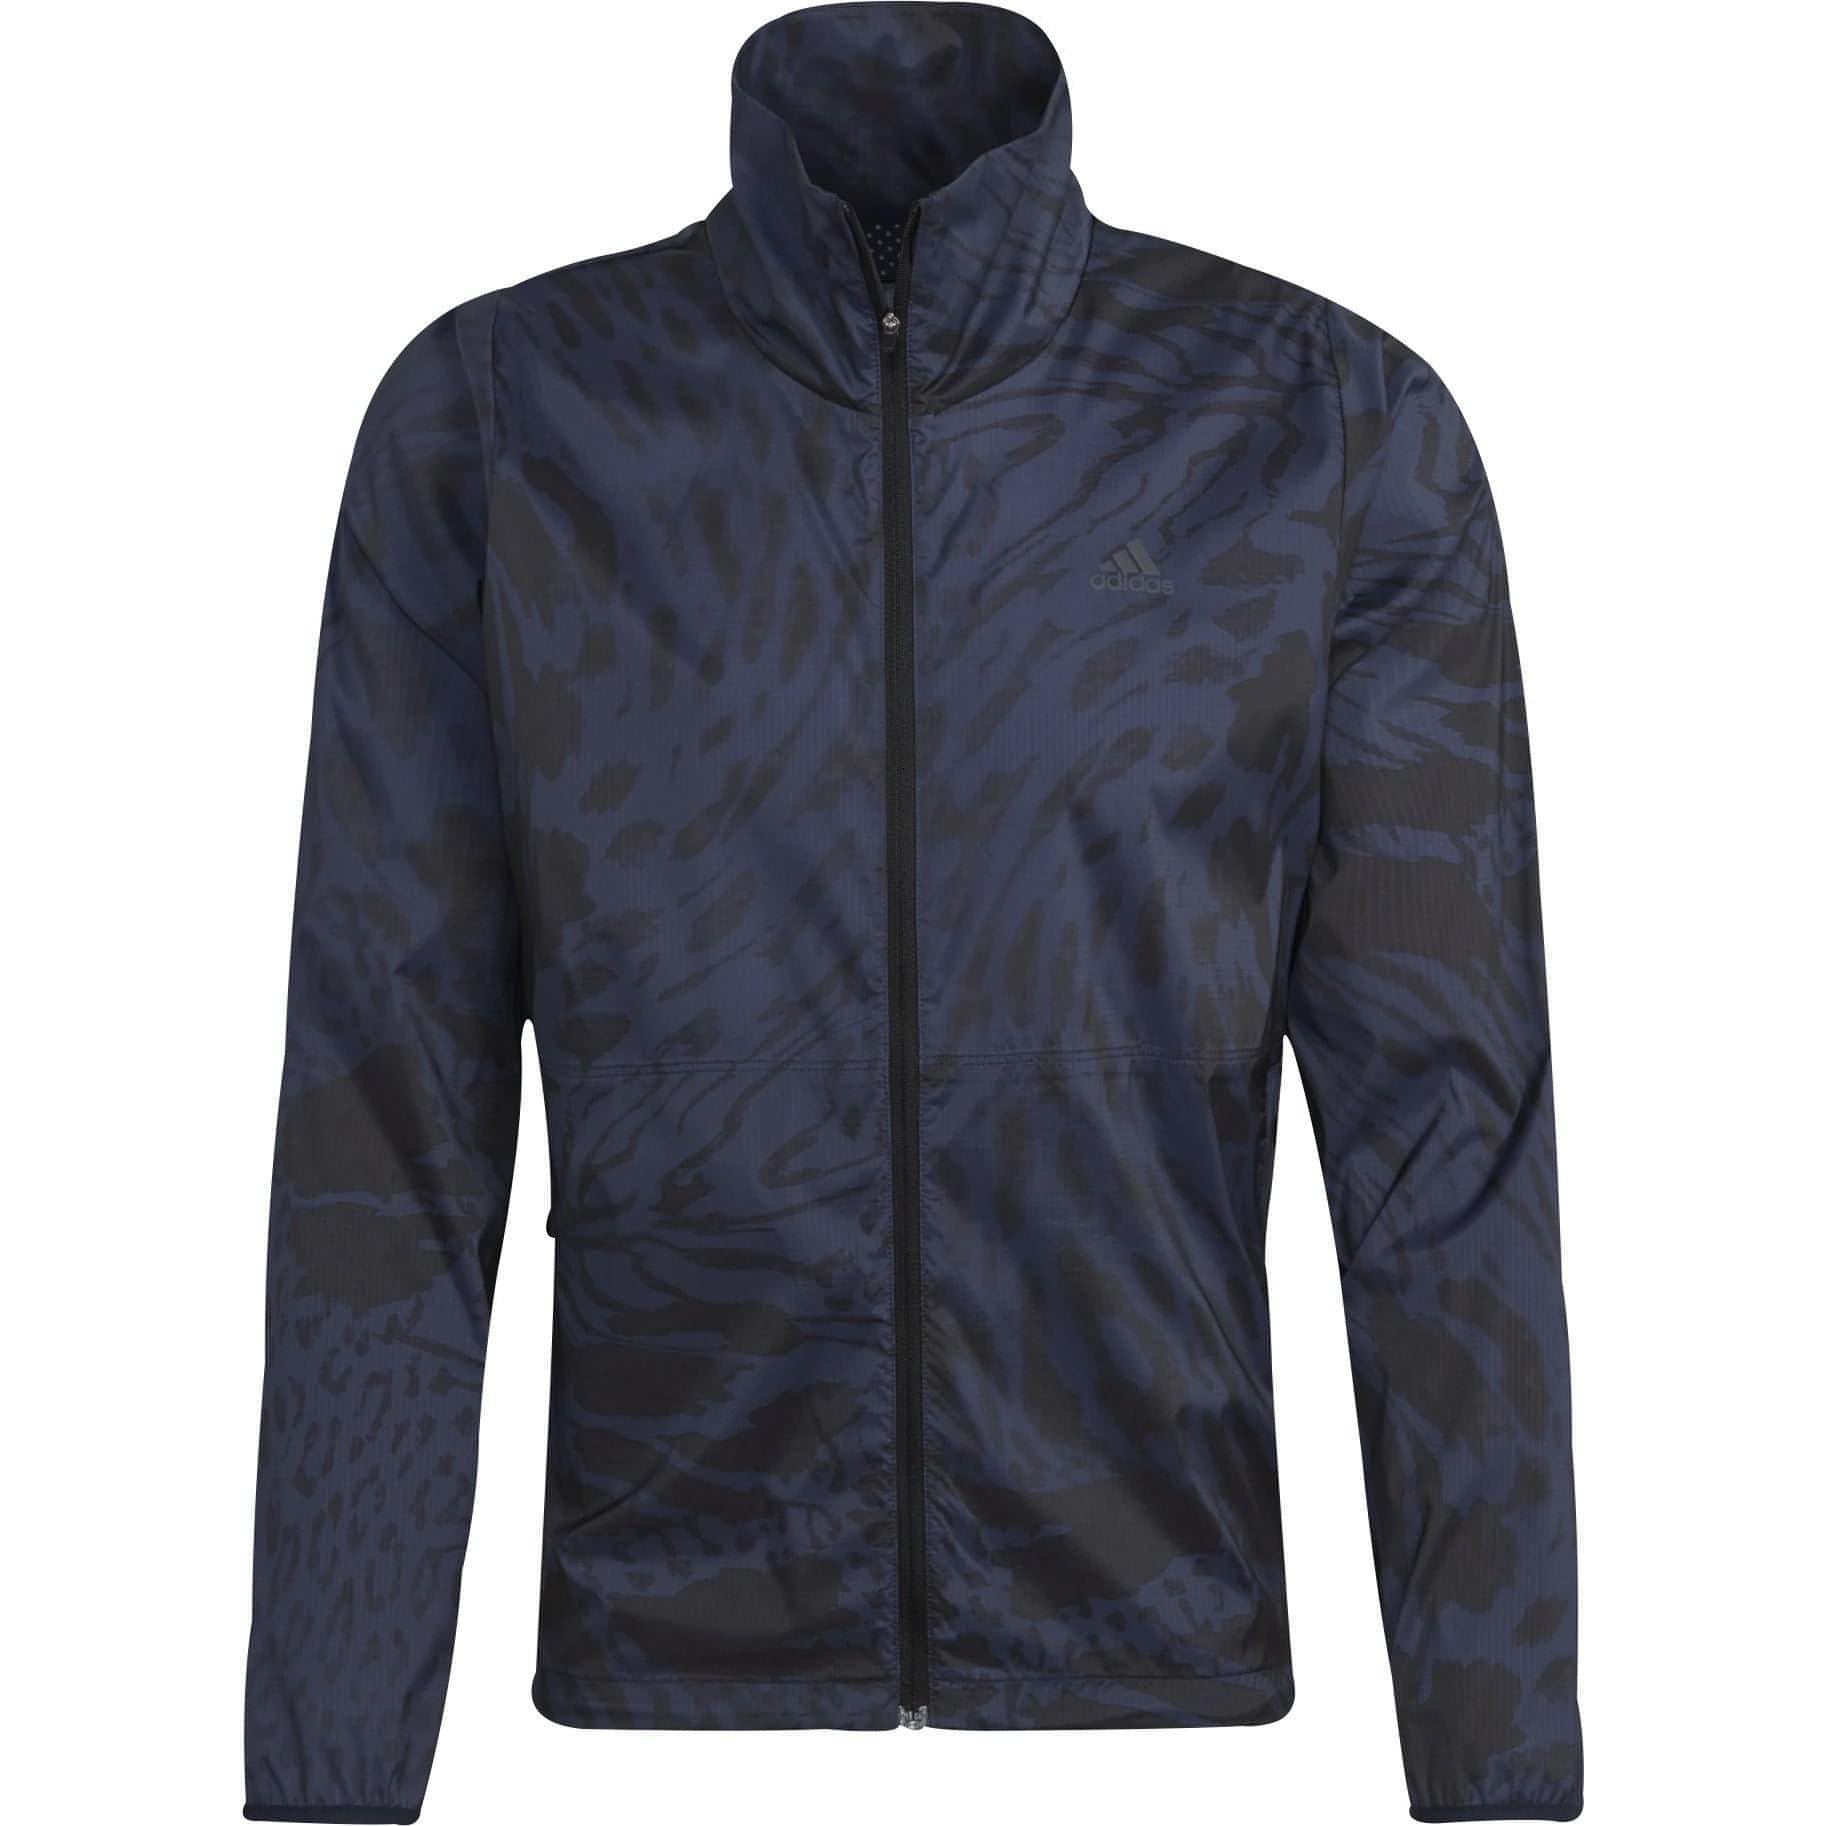 Adidas Fast Jacket Hk8993 Front - Front View